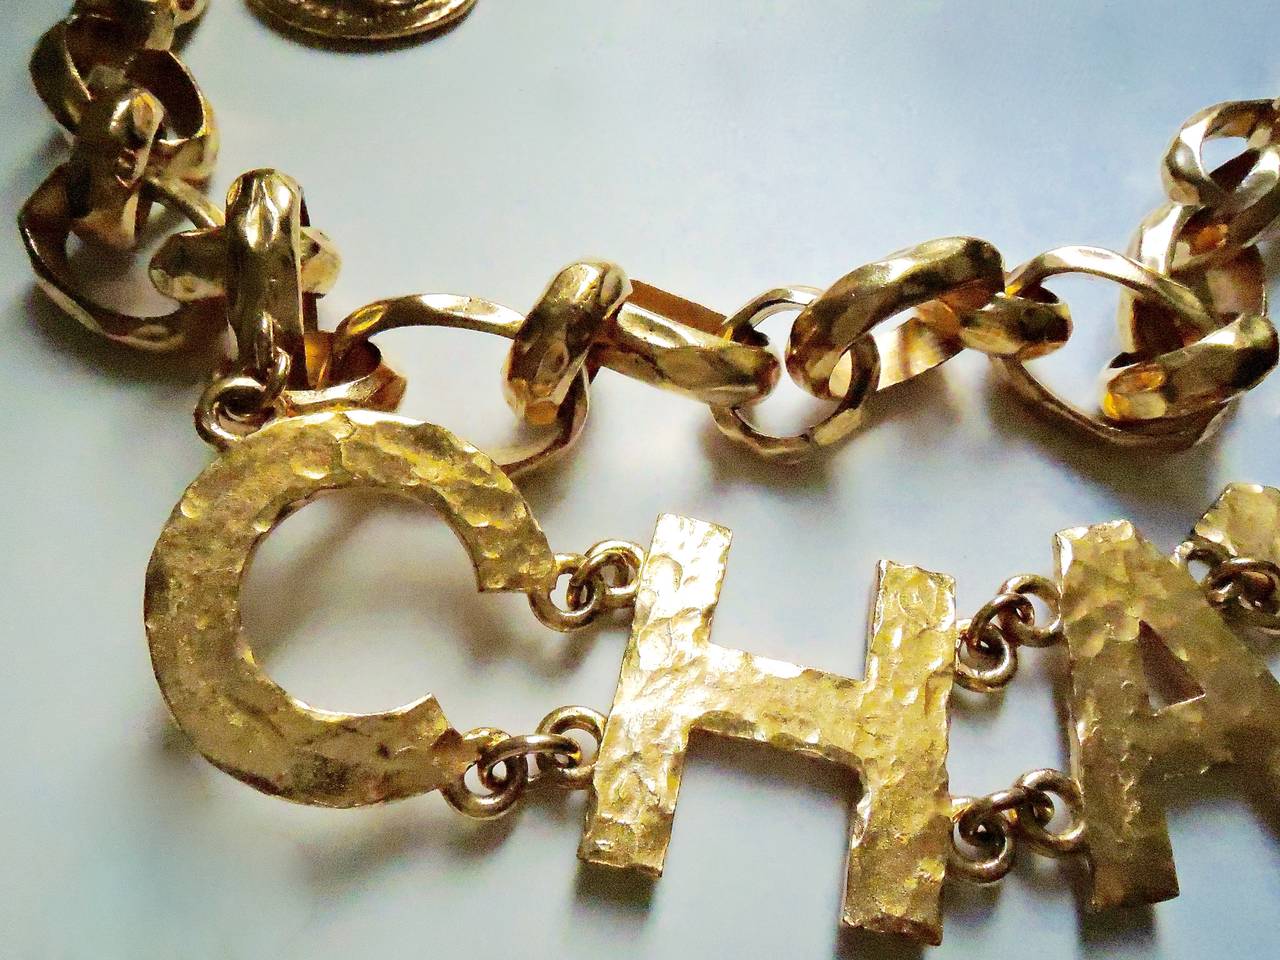 From Chanel 93A . This super fun major runway piece presents a beautiful artisan of Chanel jewellery at Chanel its best year. Fully handmade with rich hammered works. Comprising of 6 large letters : C *H A* N* E* L . and chained with heavy chunky